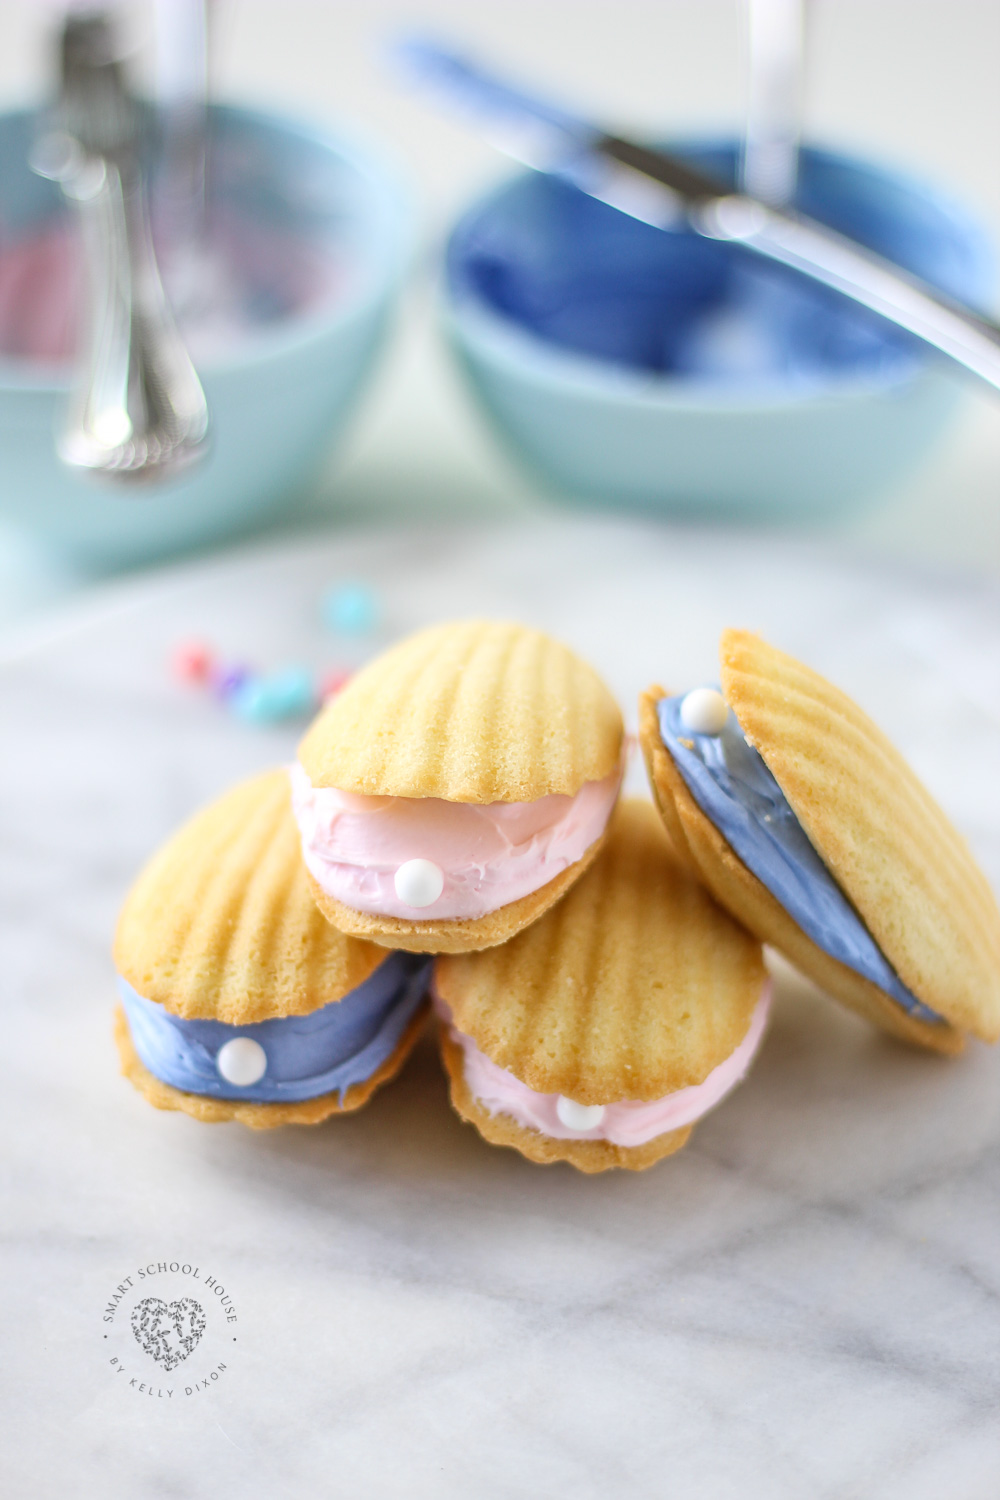 Seashell Pearl Cookies - for a beach theme party or mermaid party. Also fun for a quick and easy dessert. #UnderTheSea #MermaidParty #BeachTheme #SeashellCookies